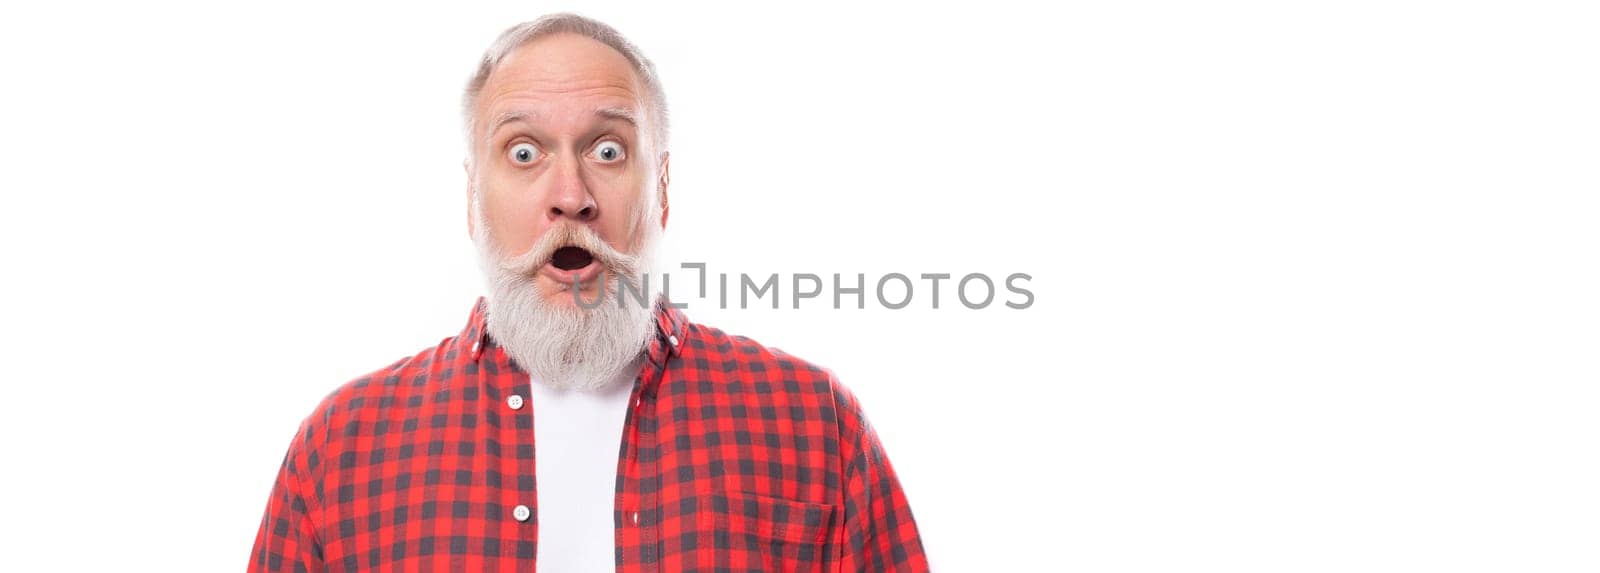 european surprised 60s elderly grandfather man with gray beard and mustache.